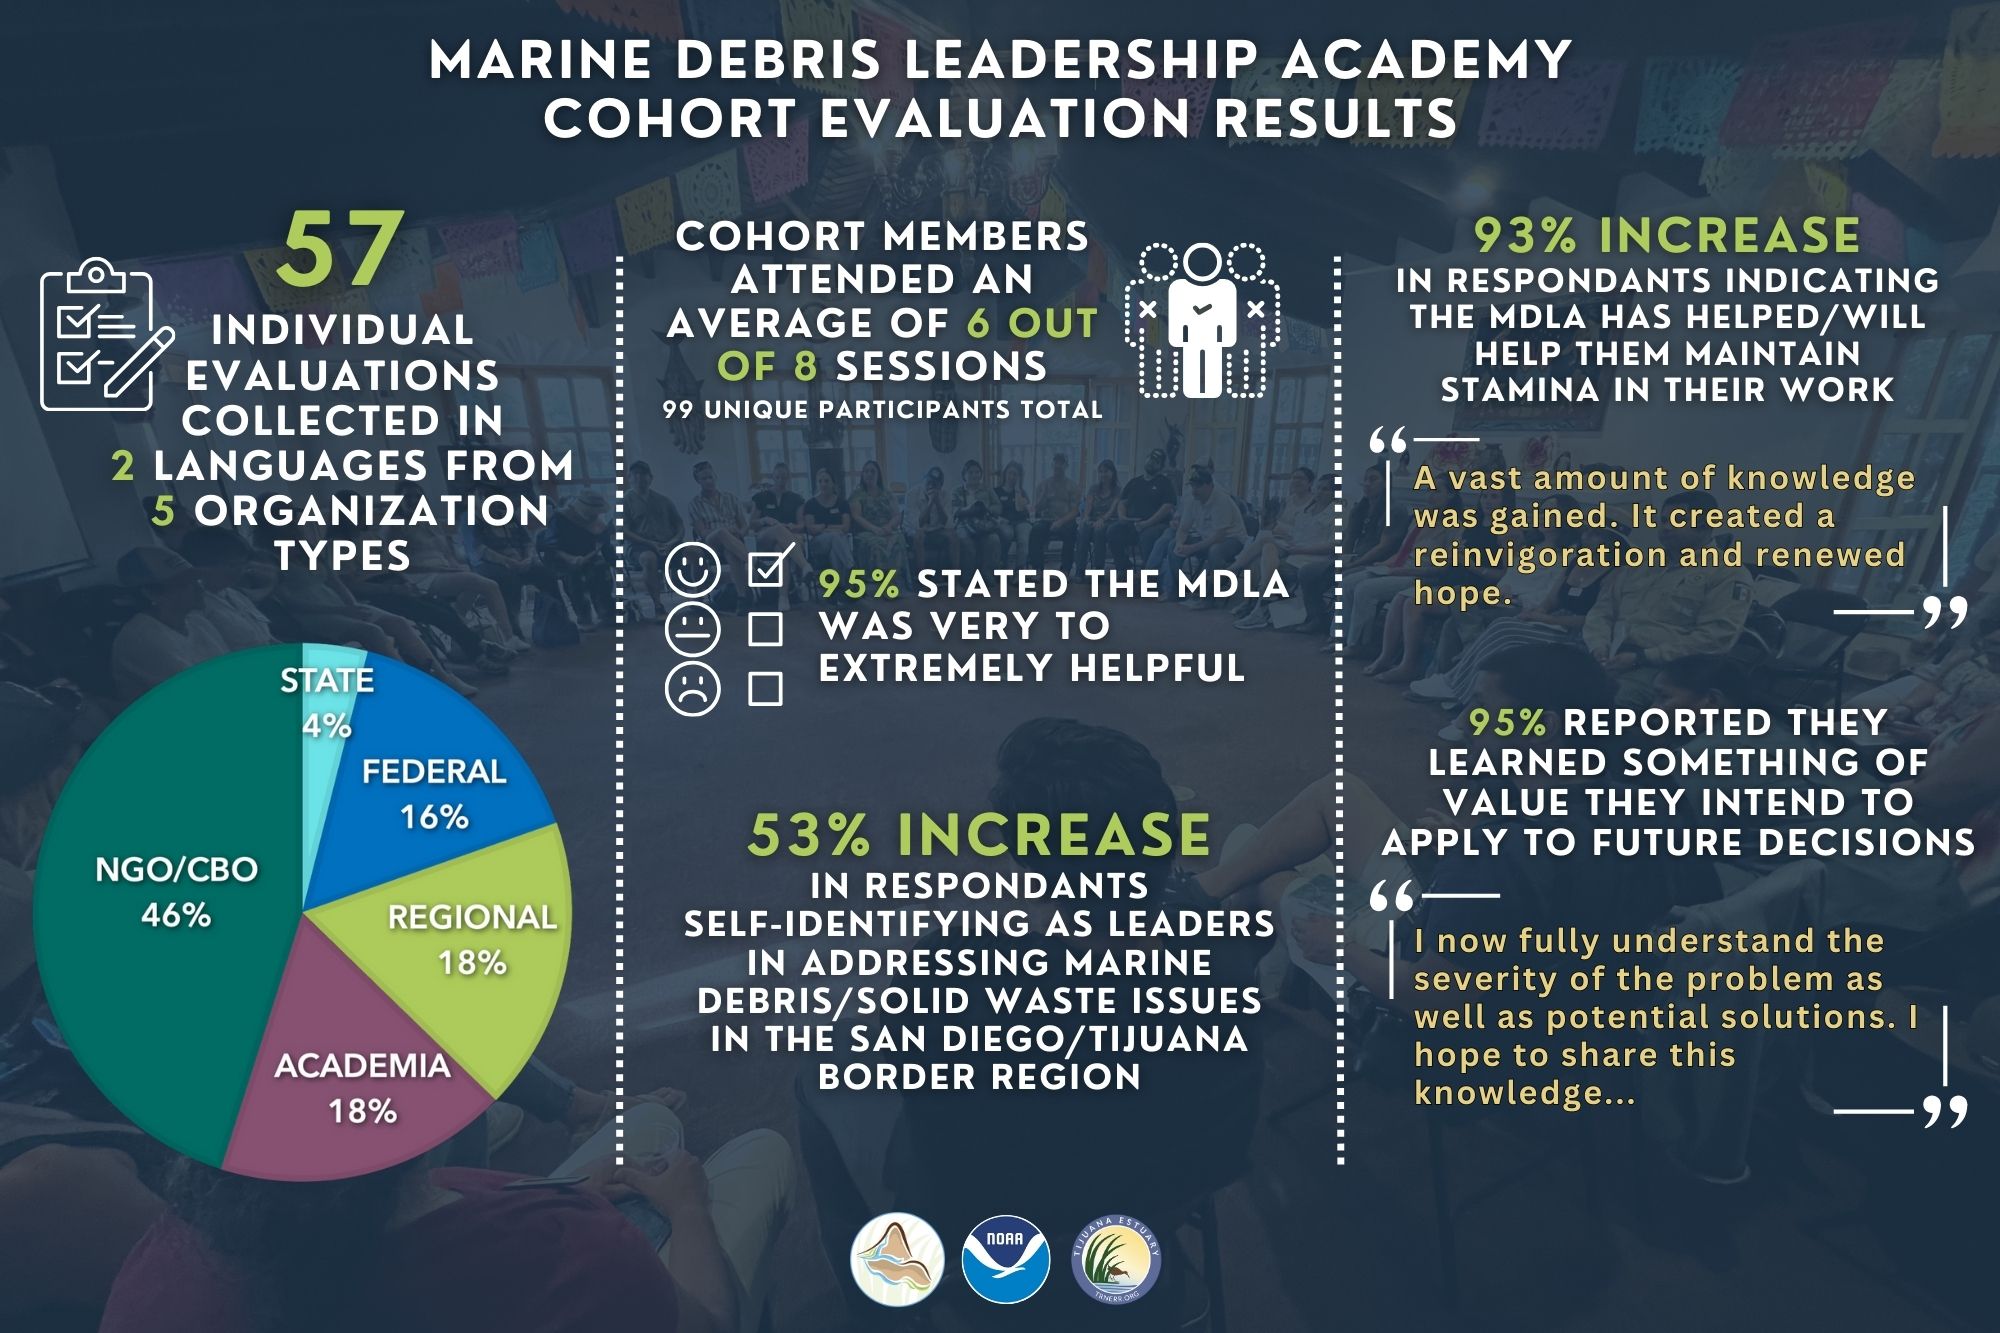 Infographic of results from the marine debris leadership academy.